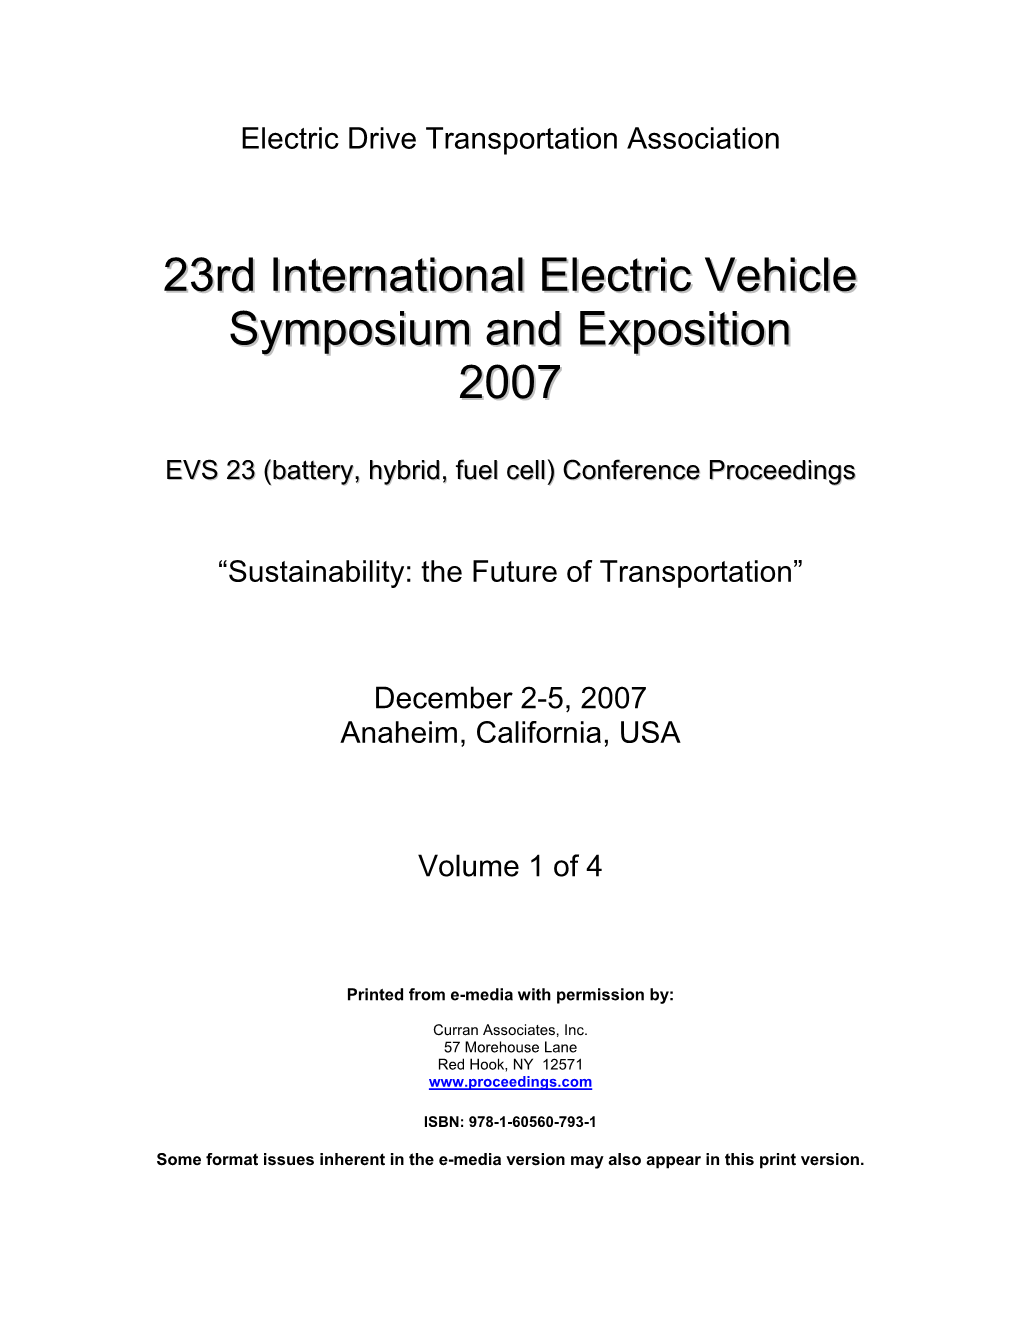 23Rd International Electric Vehicle Symposium and Exposition 2007